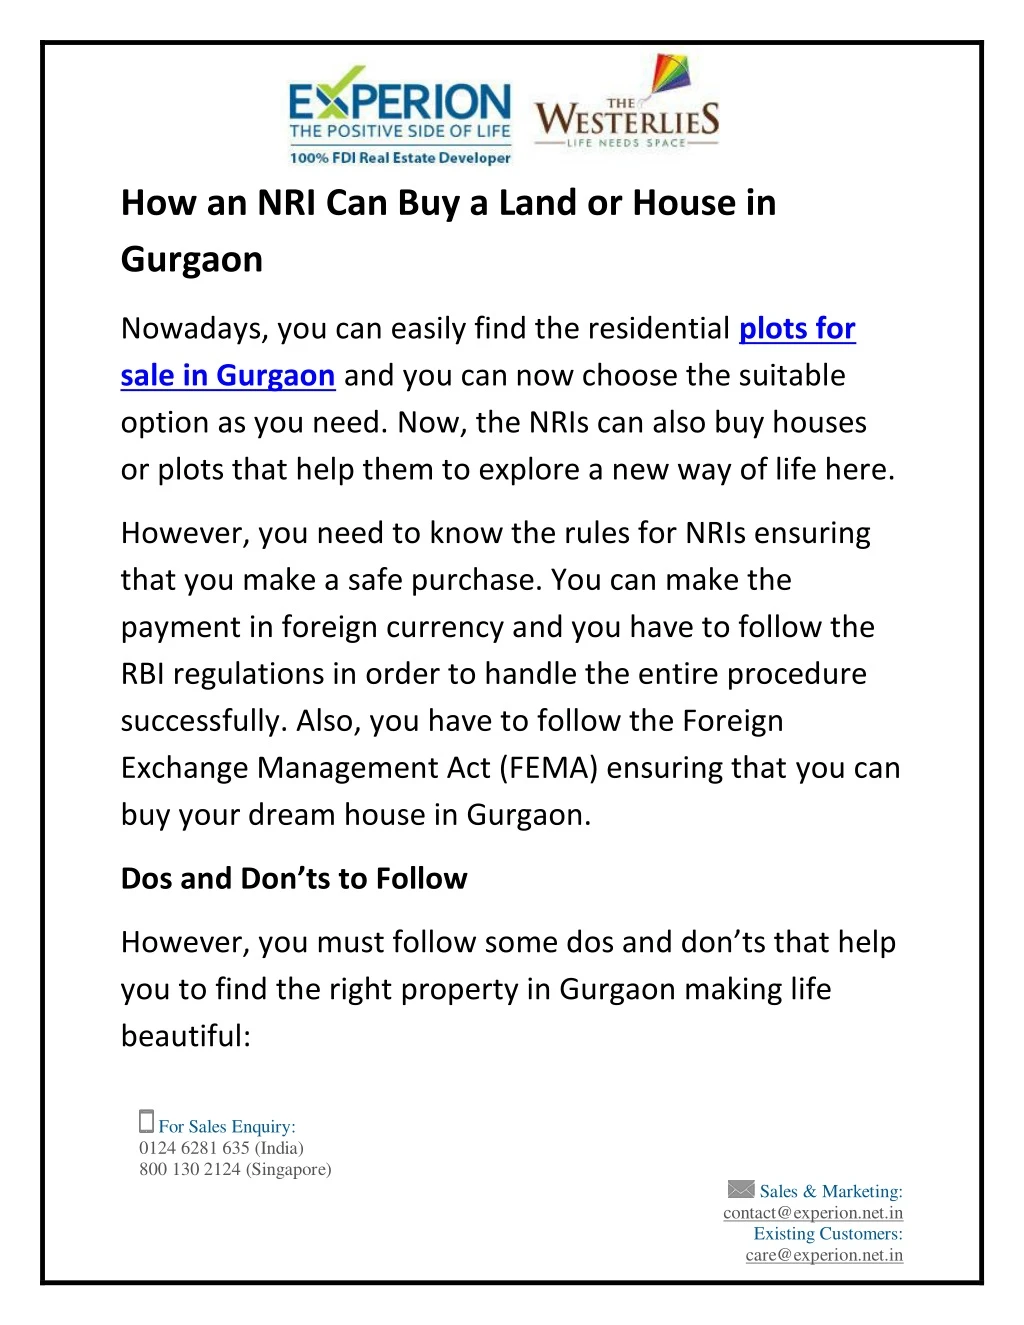 how an nri can buy a land or house in gurgaon